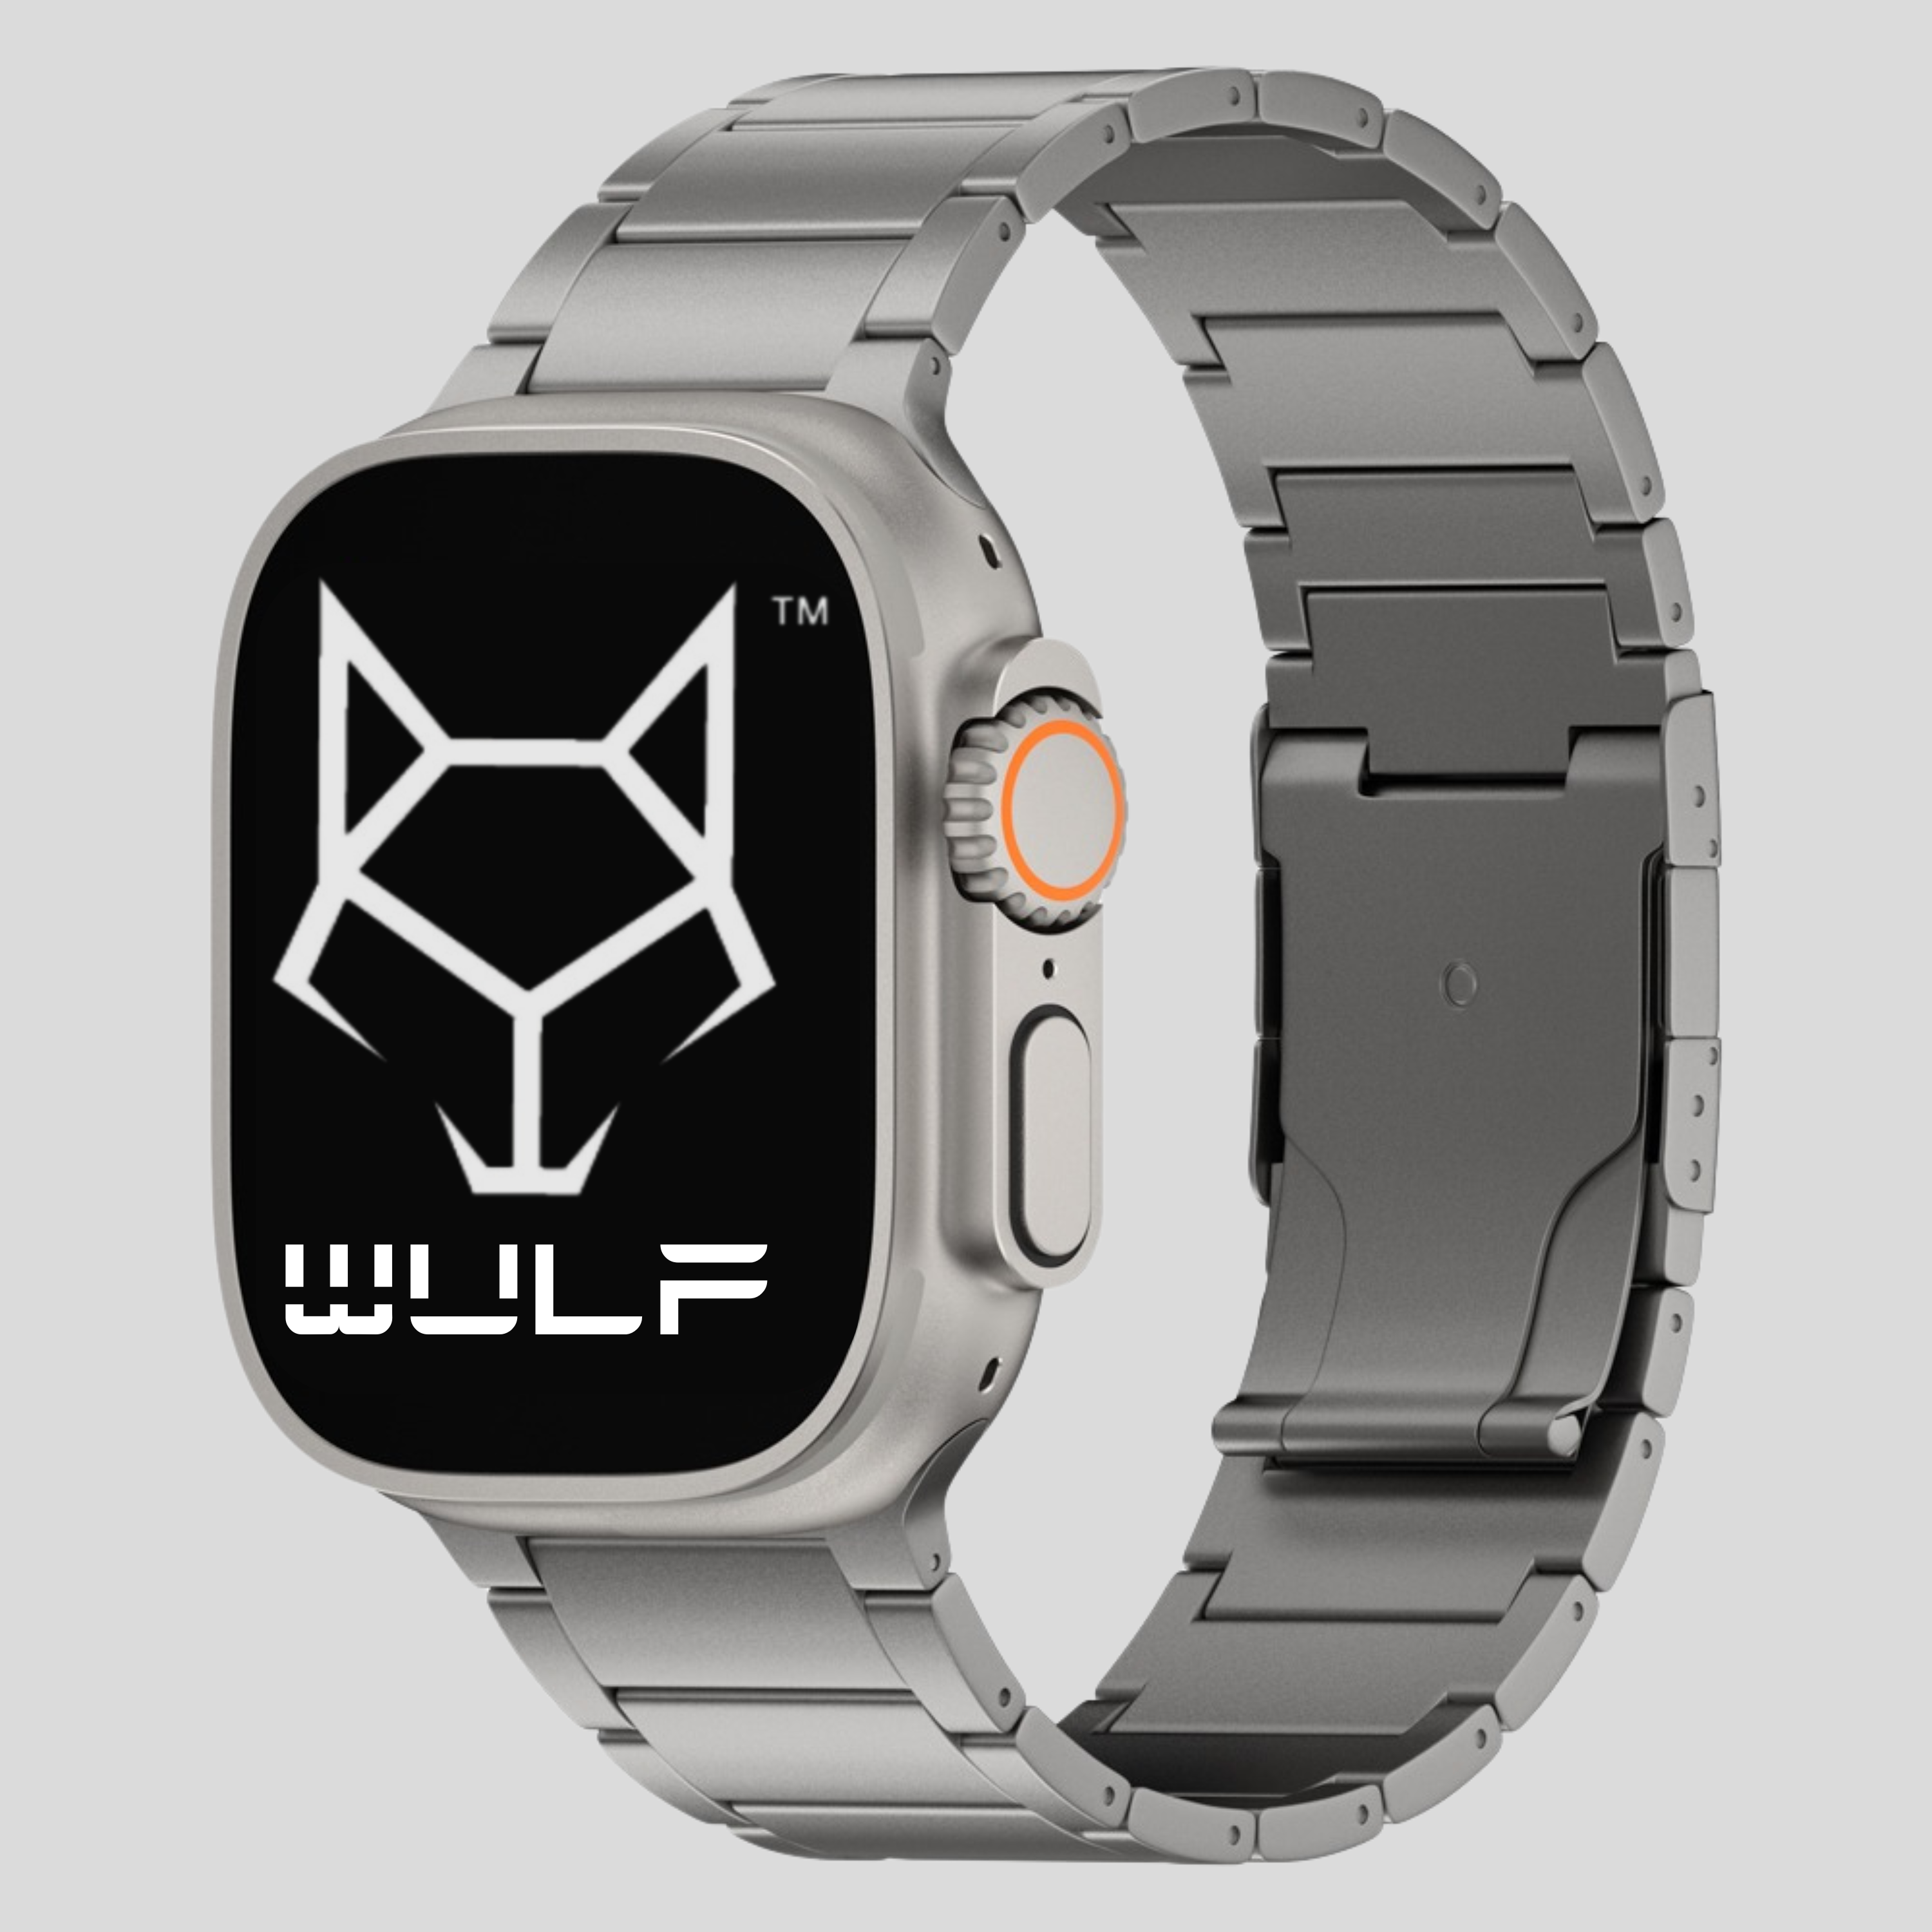 WULF Titanium Armor Watch Band - Made for the Apple Watch